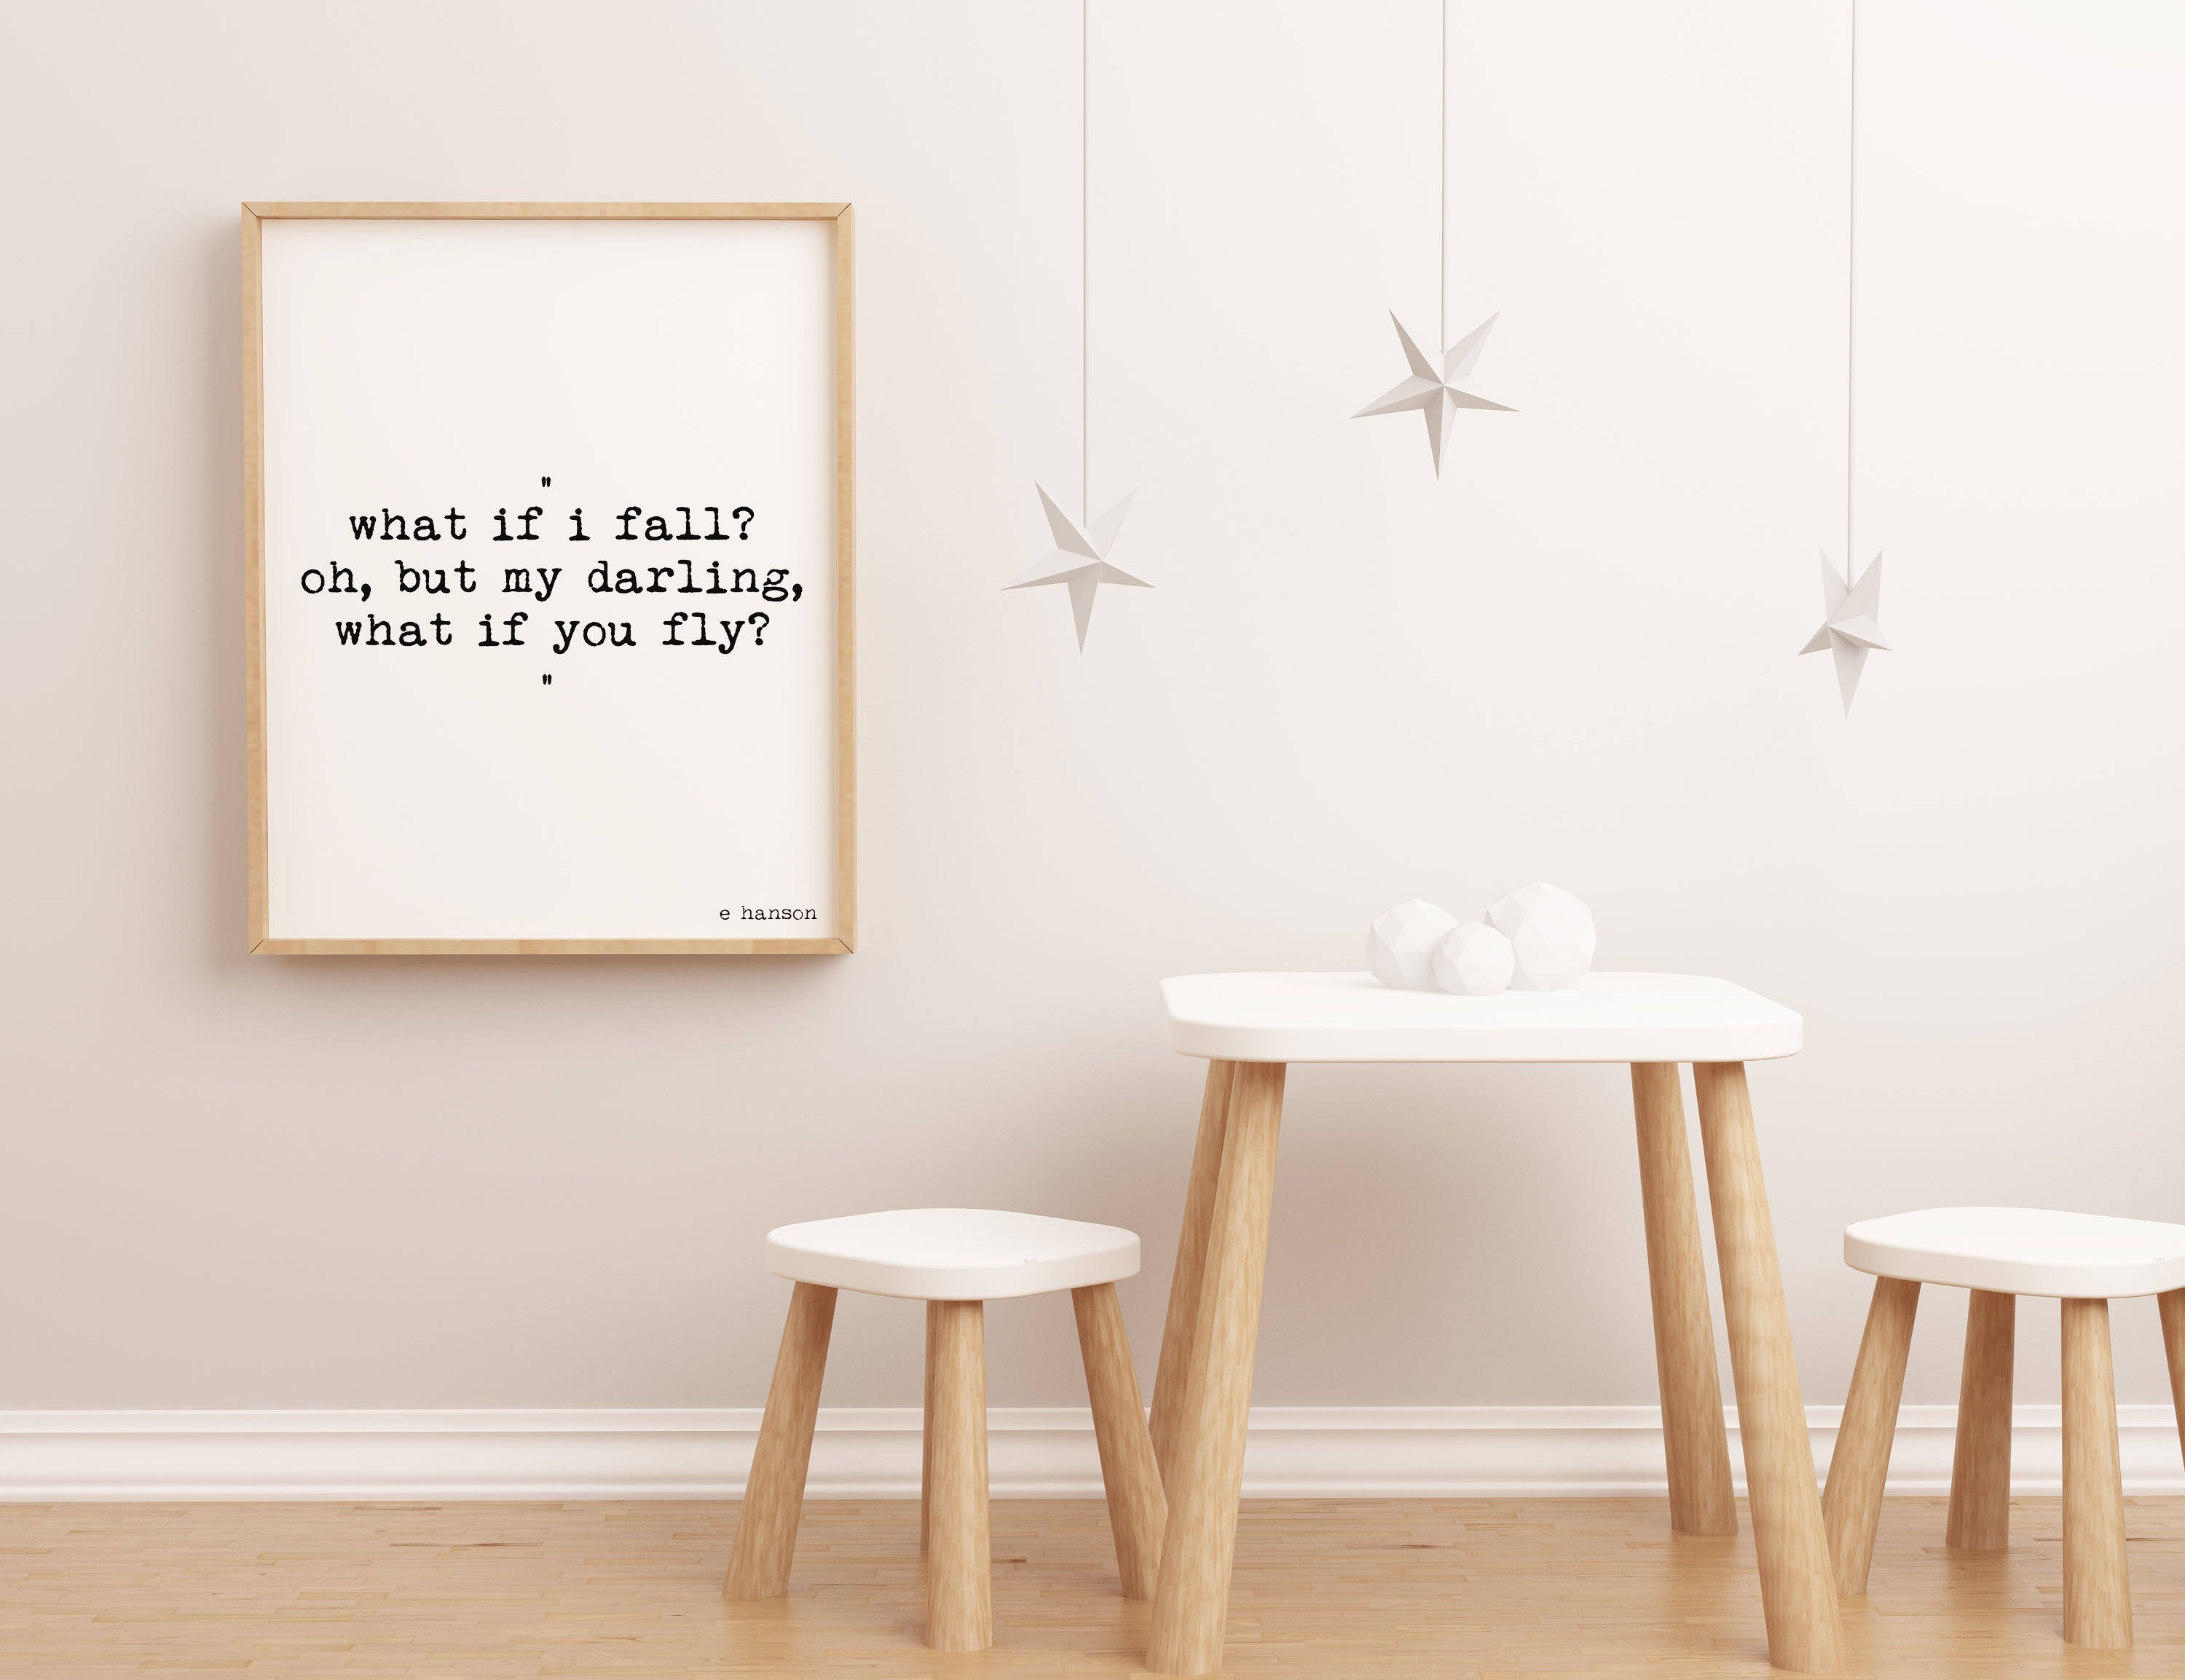 What if I fall? Oh but my darling, What if you fly? Art for Nursery Decor in Black & White